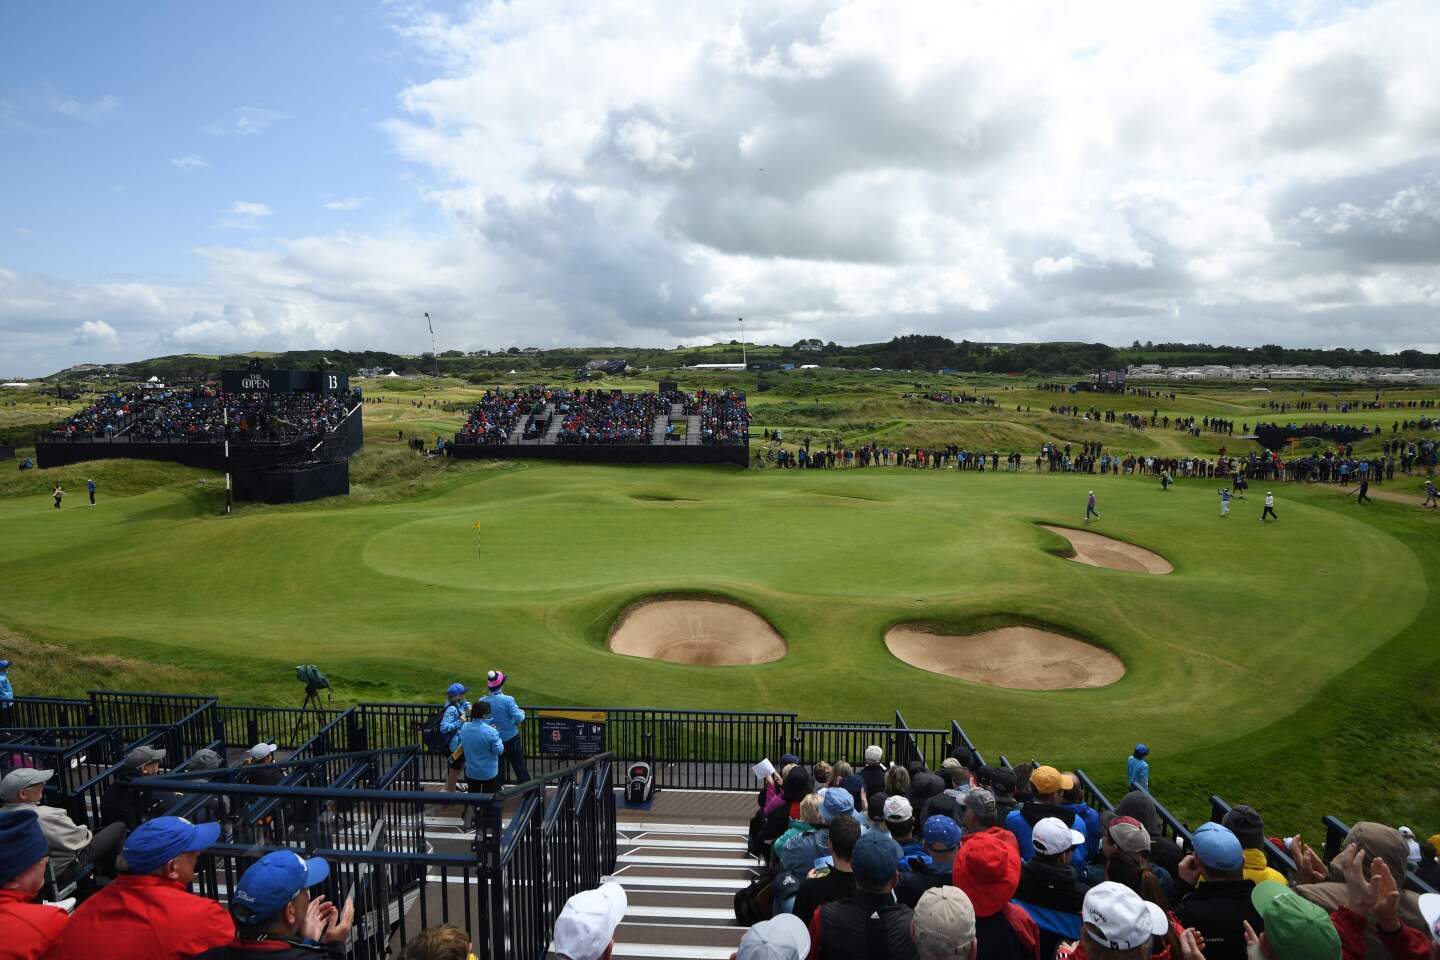 Golfers arrive on the 13th green during the first round of the 148th Open Championship at Royal Portrush Golf Club in Northern Ireland.